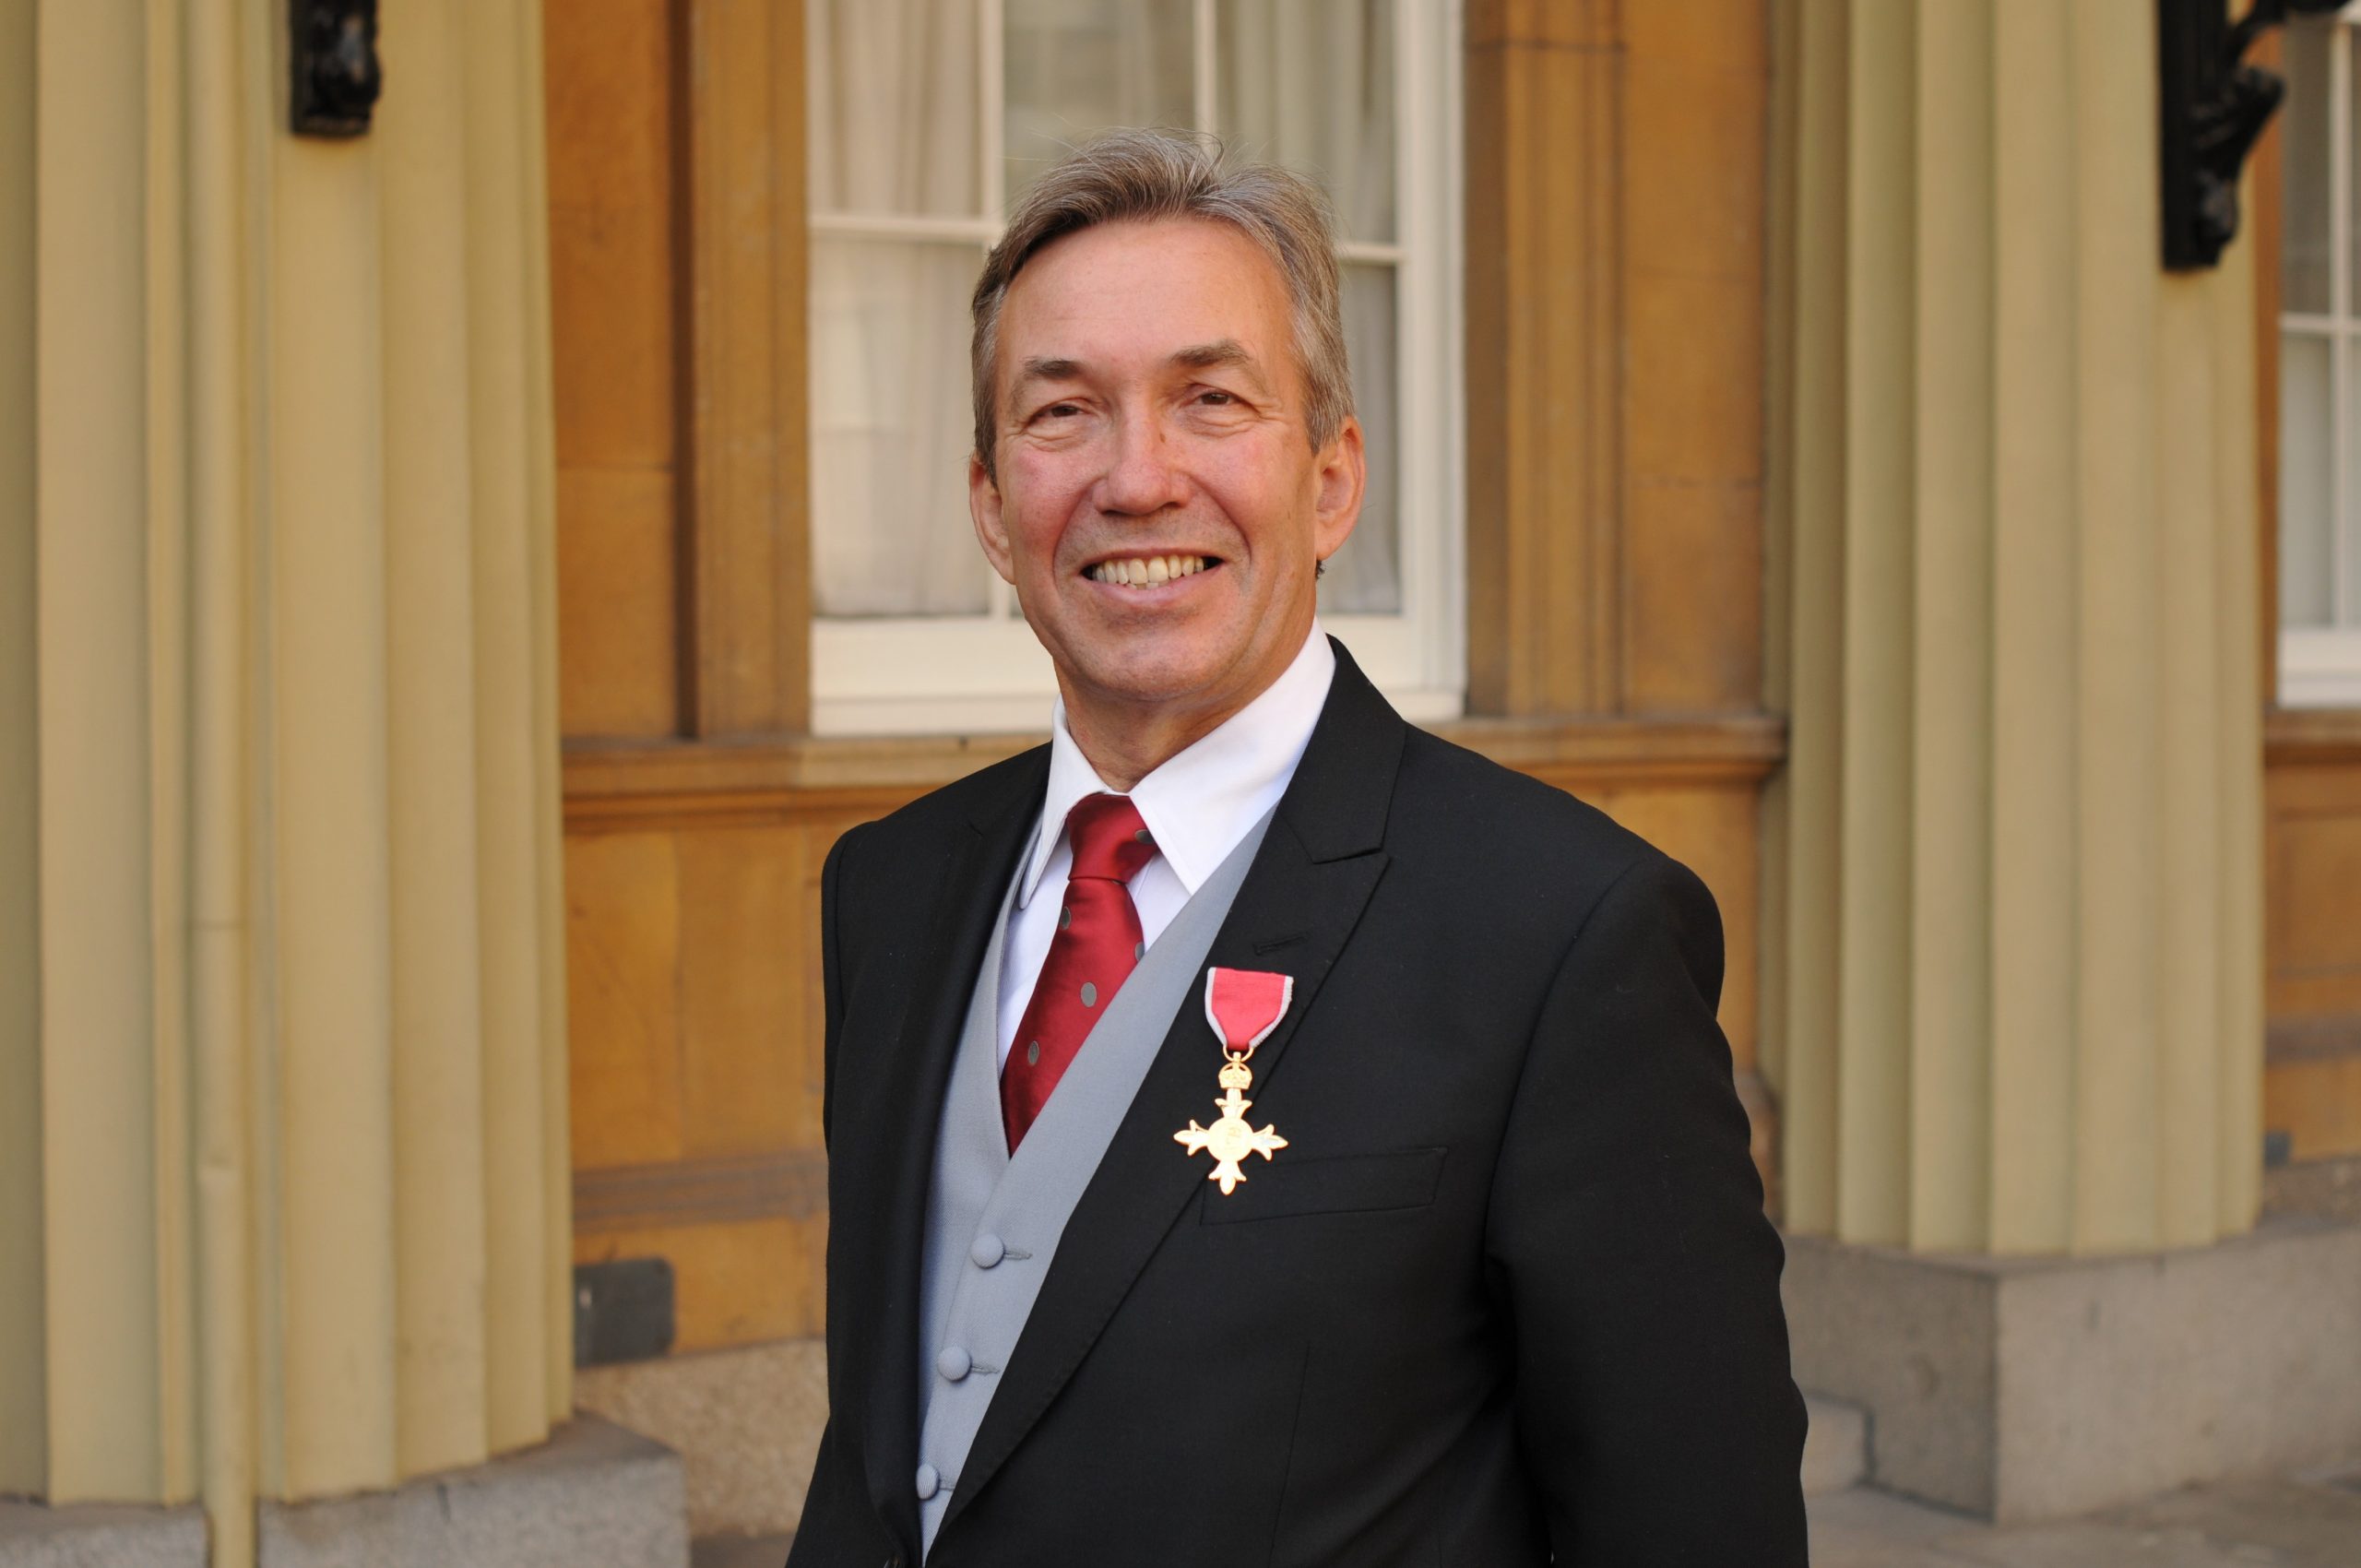 Nick with his OBE